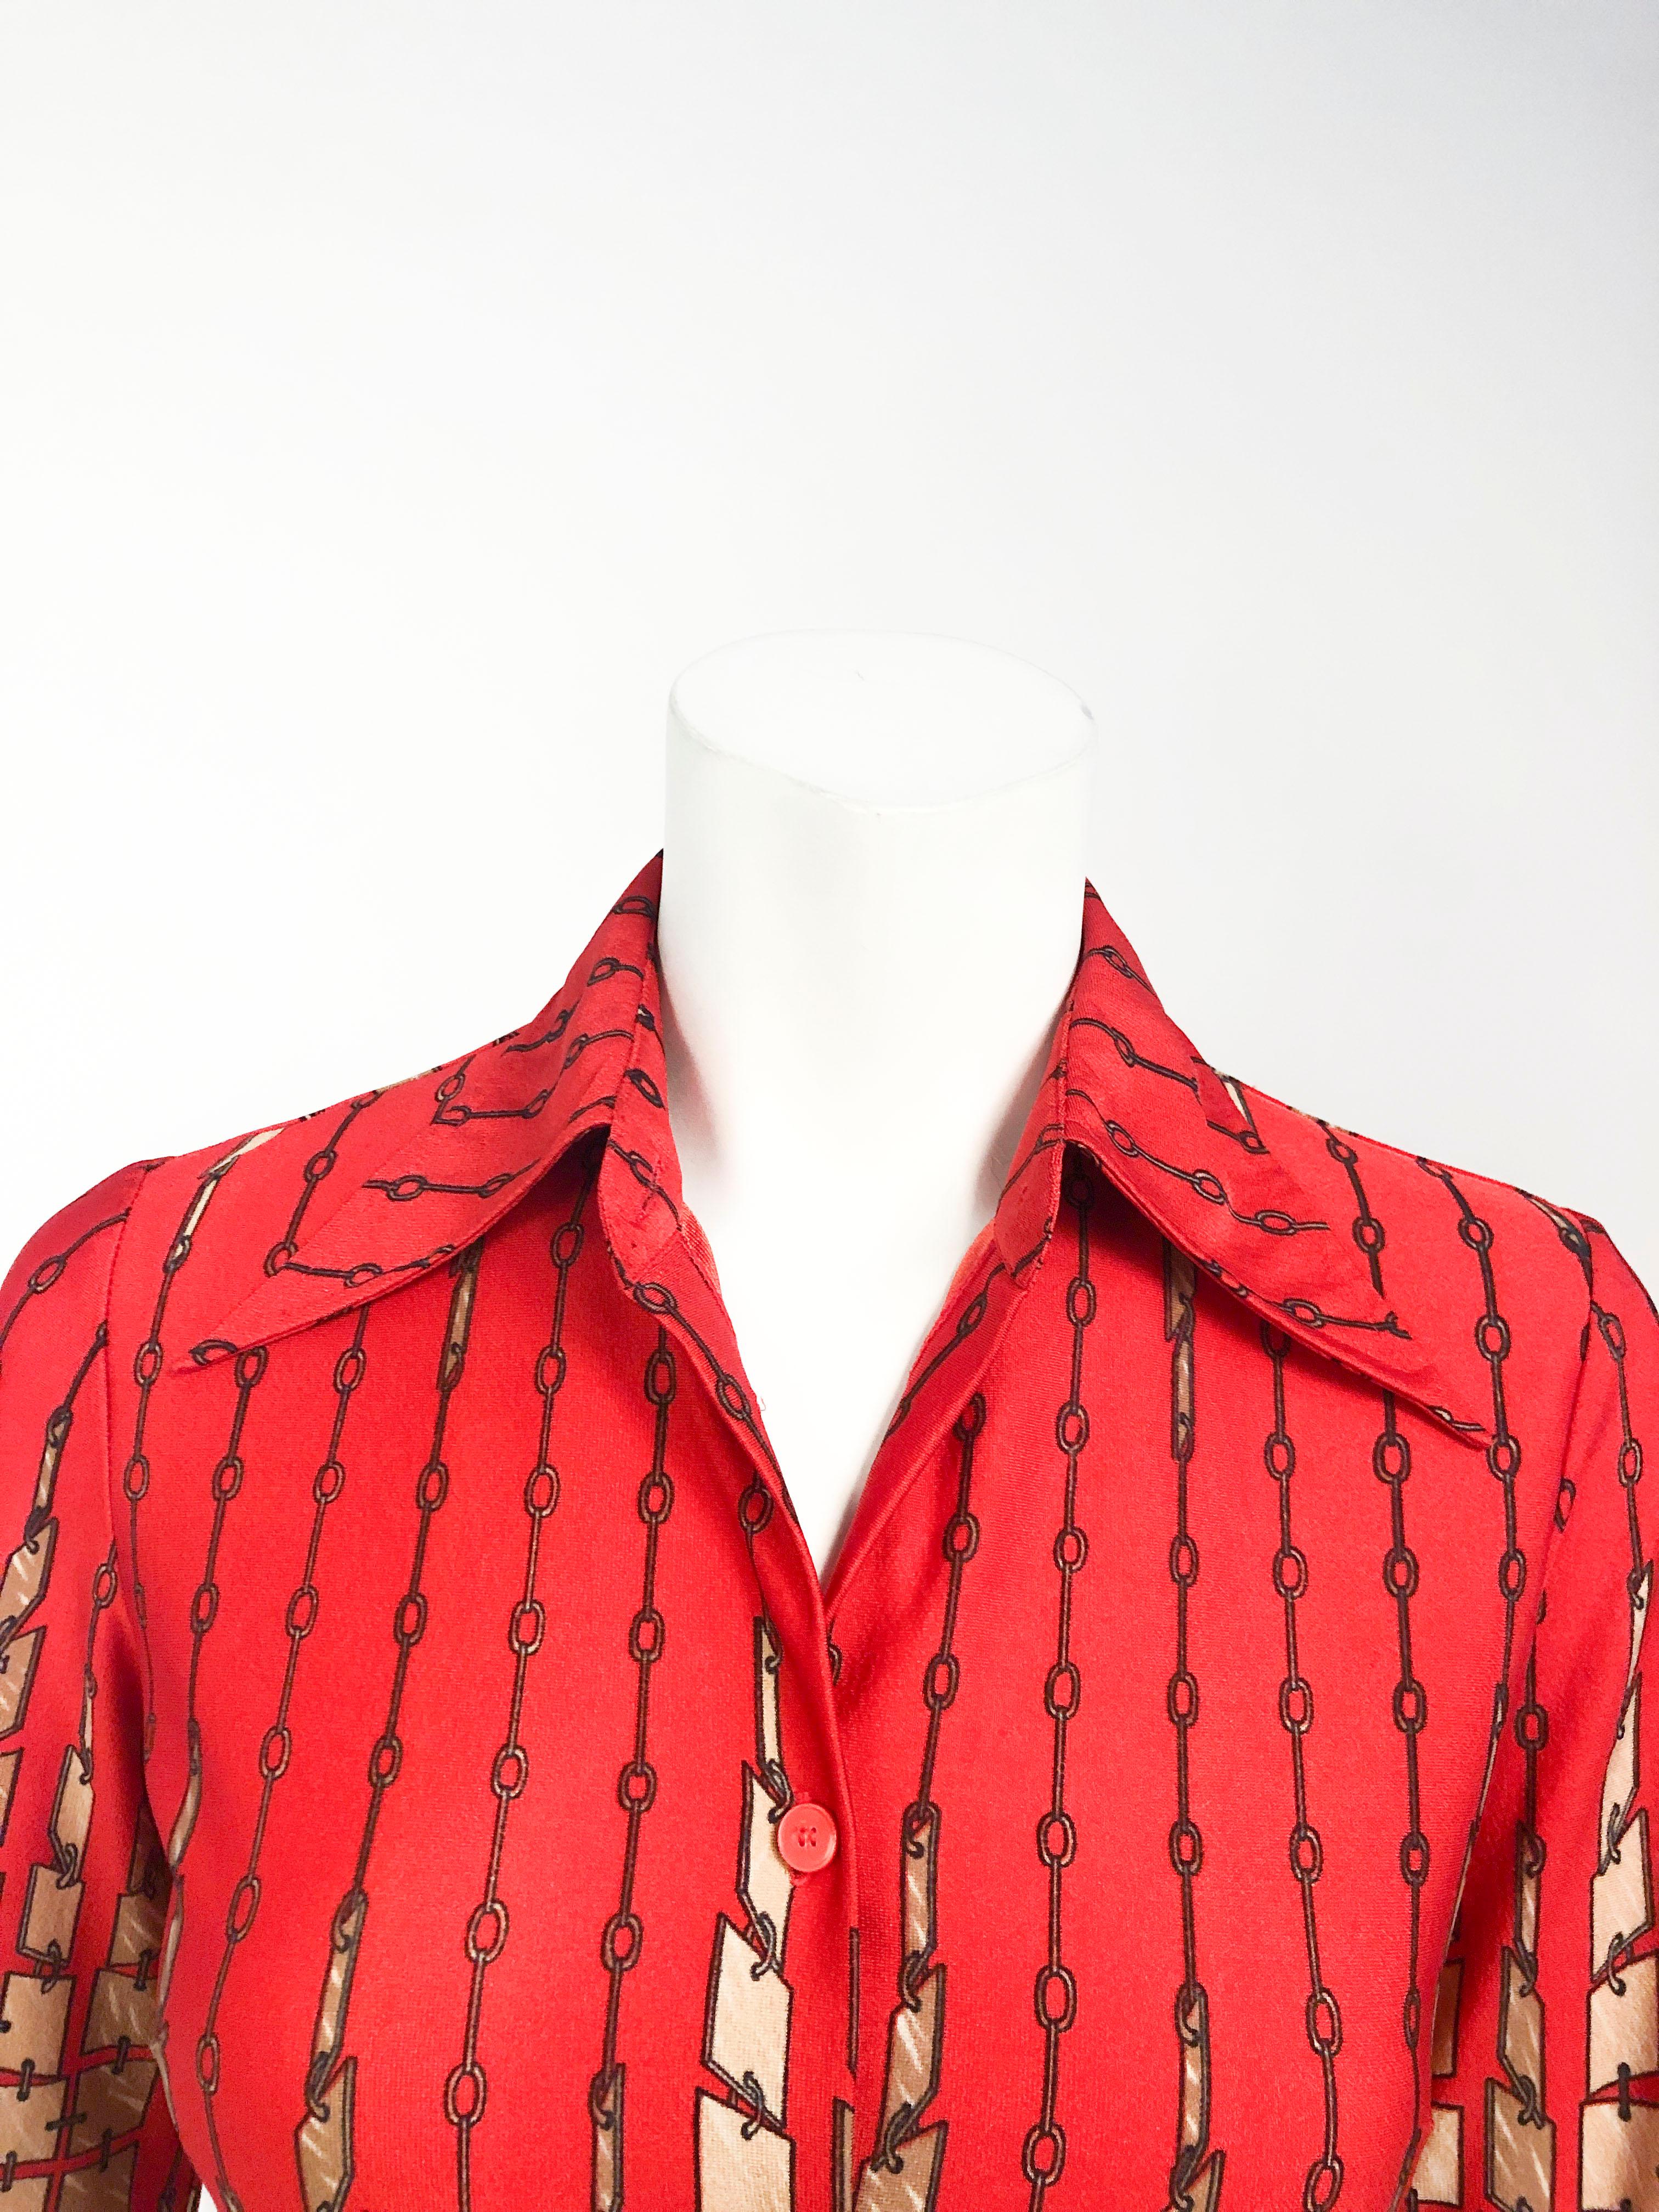 1970s Lanvin red printed shirt with turning tile motif. Accented with butterfly collar, cuffed sleeves, and red buttons. This item is made of a fine knitted polyester.  